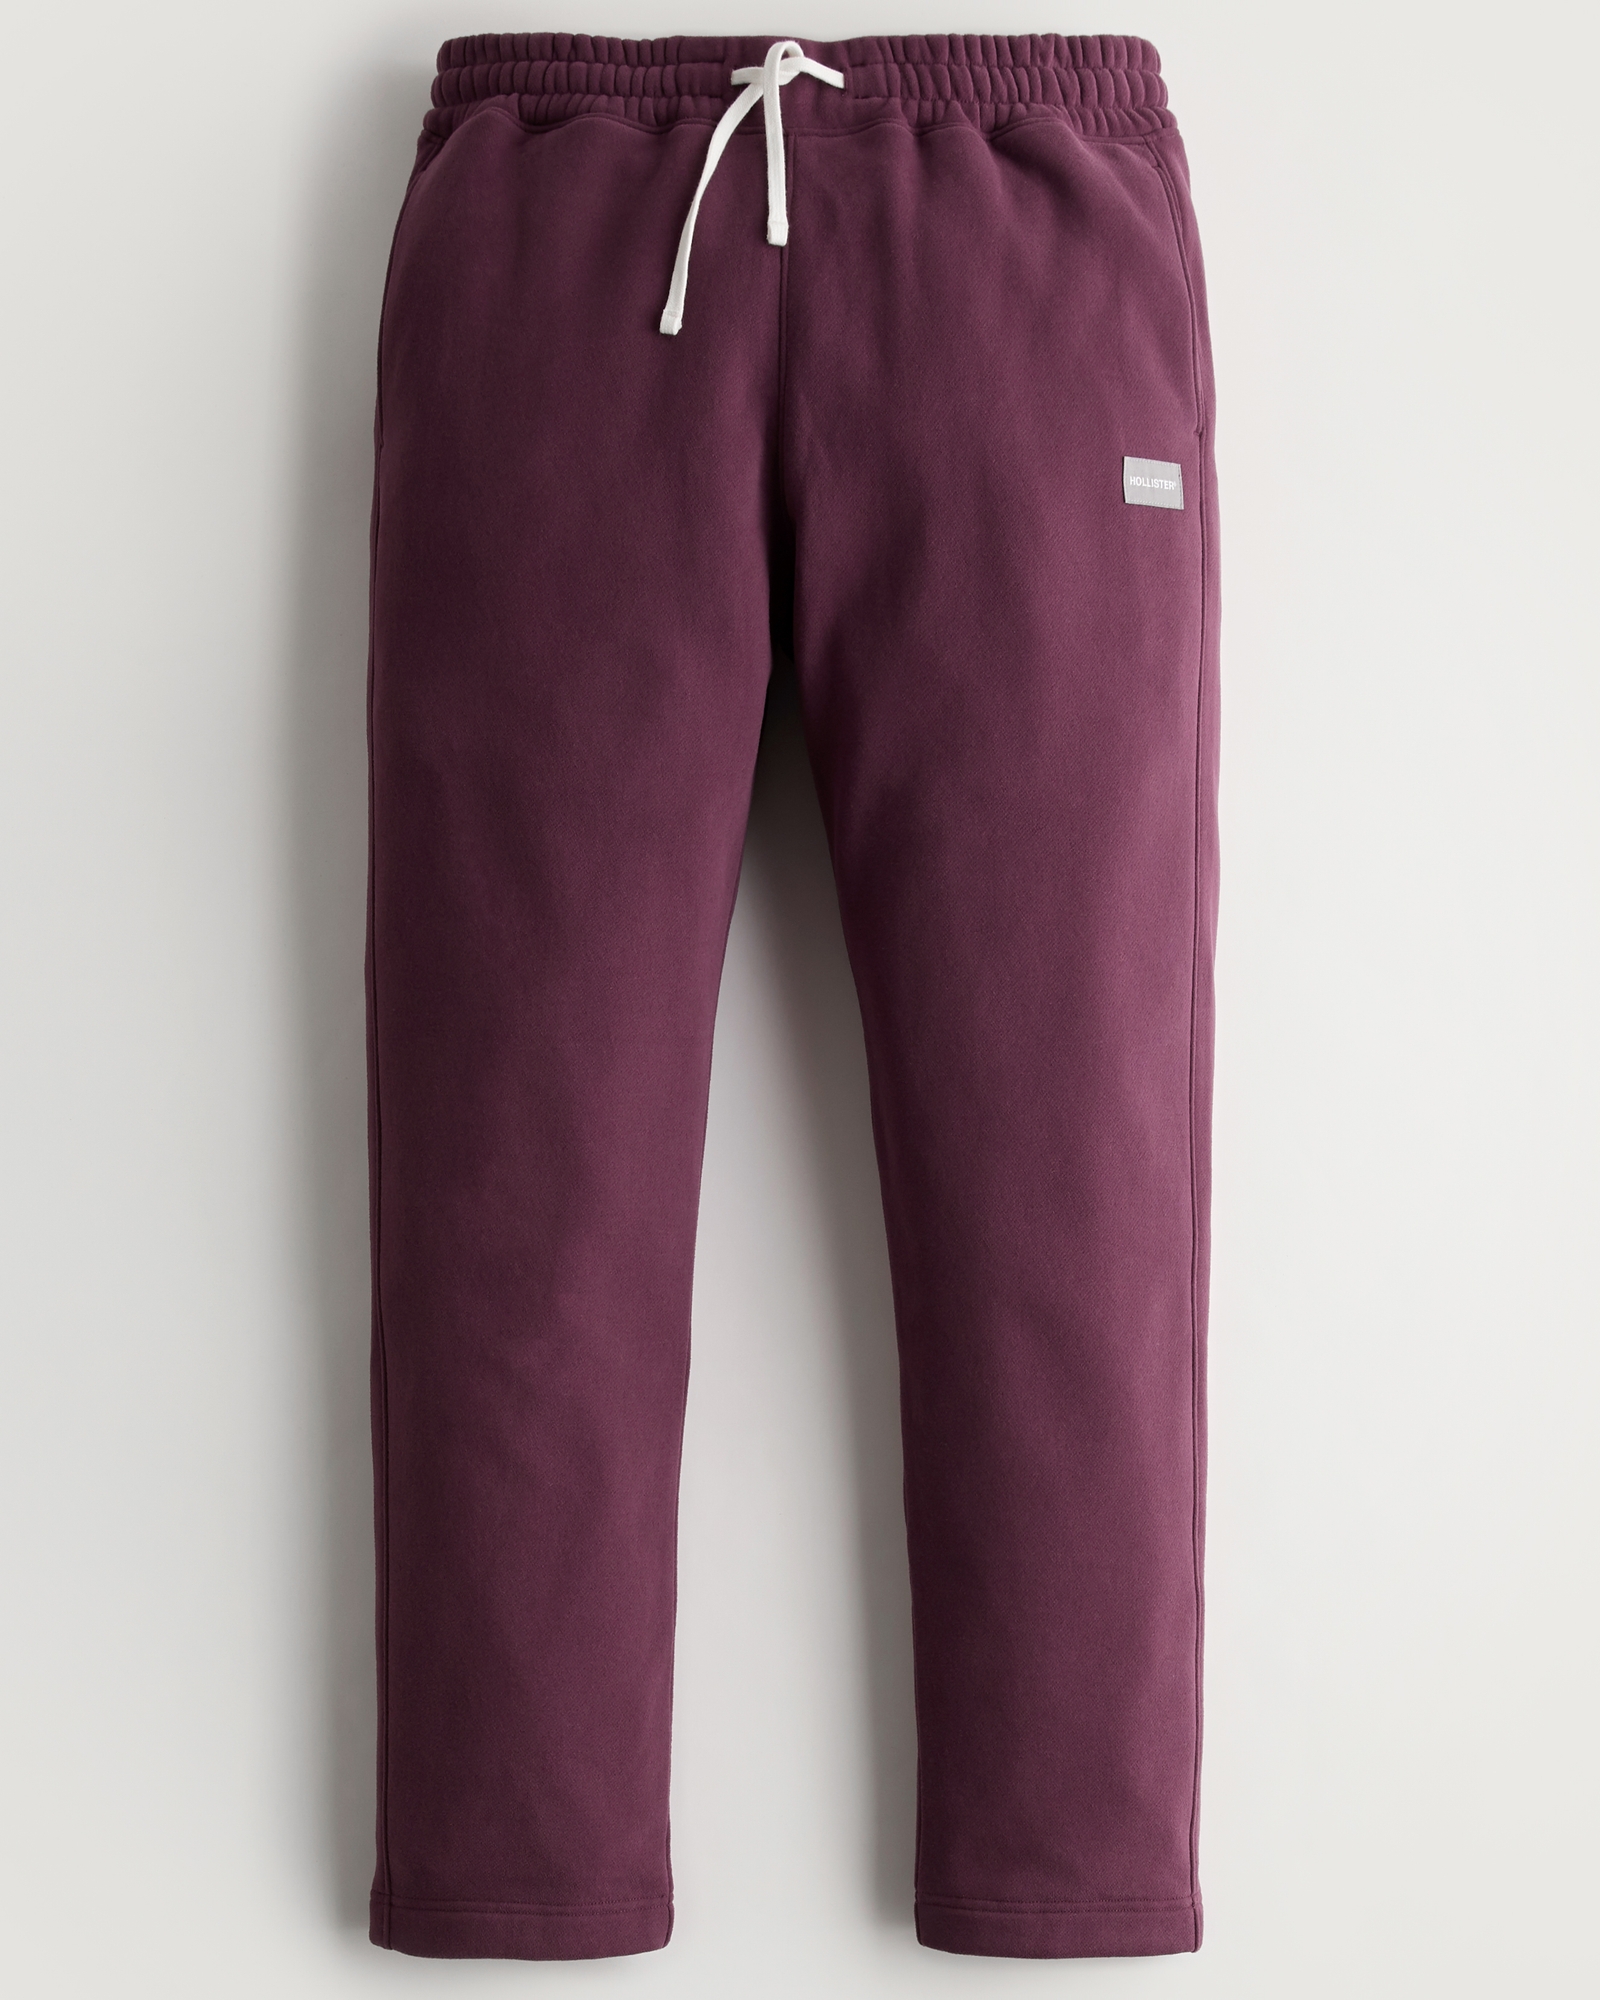 Stay comfortable in these Hollister Men's Sweatpants